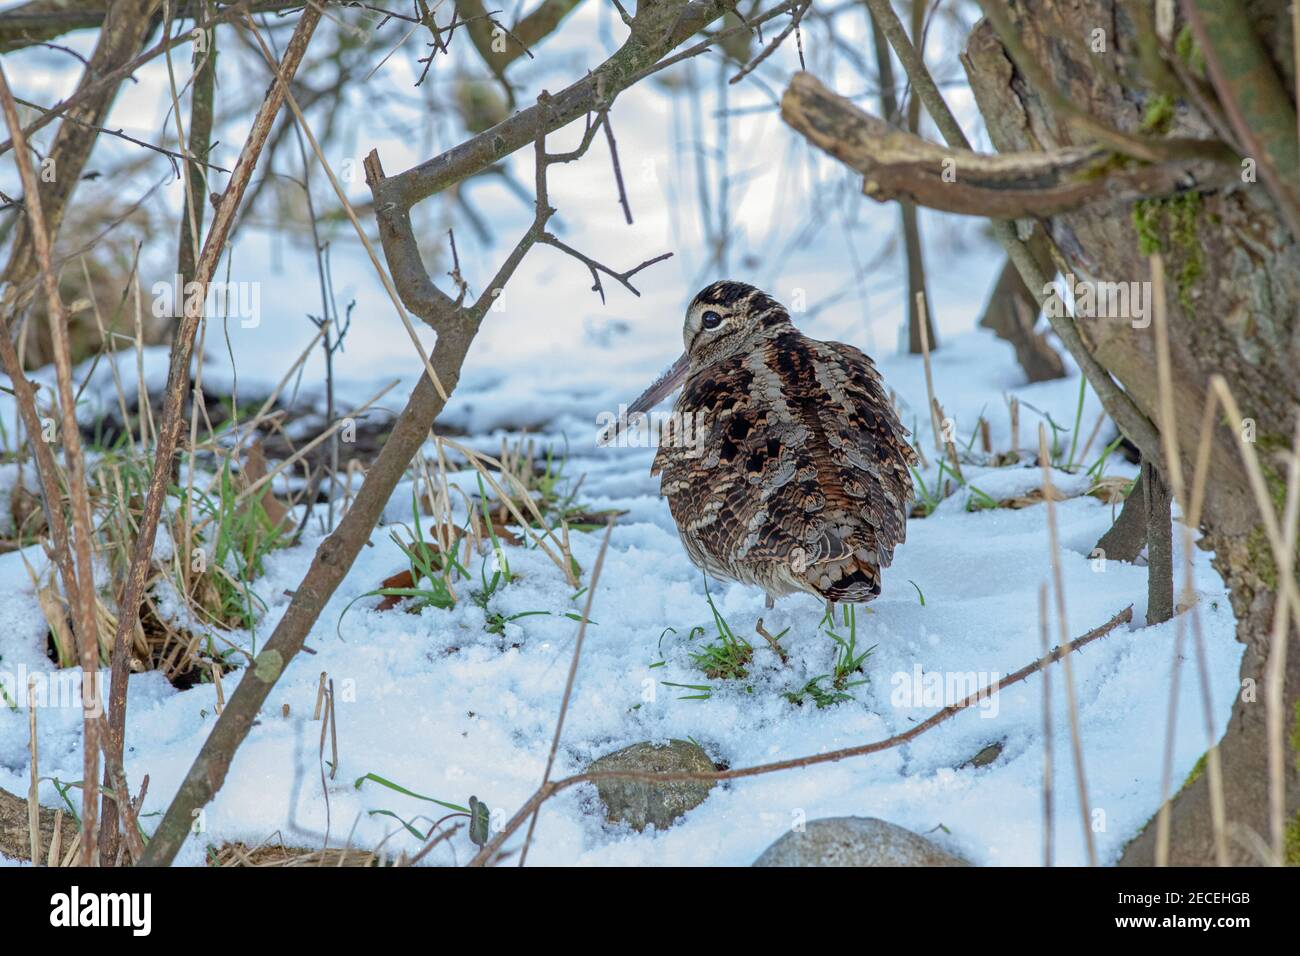 Woodcock (Scolopax rusticola). Rear view. On snow showing cryptic marked plumage. Arrival during hard winter weather. February. East Anglia. UK. Stock Photo